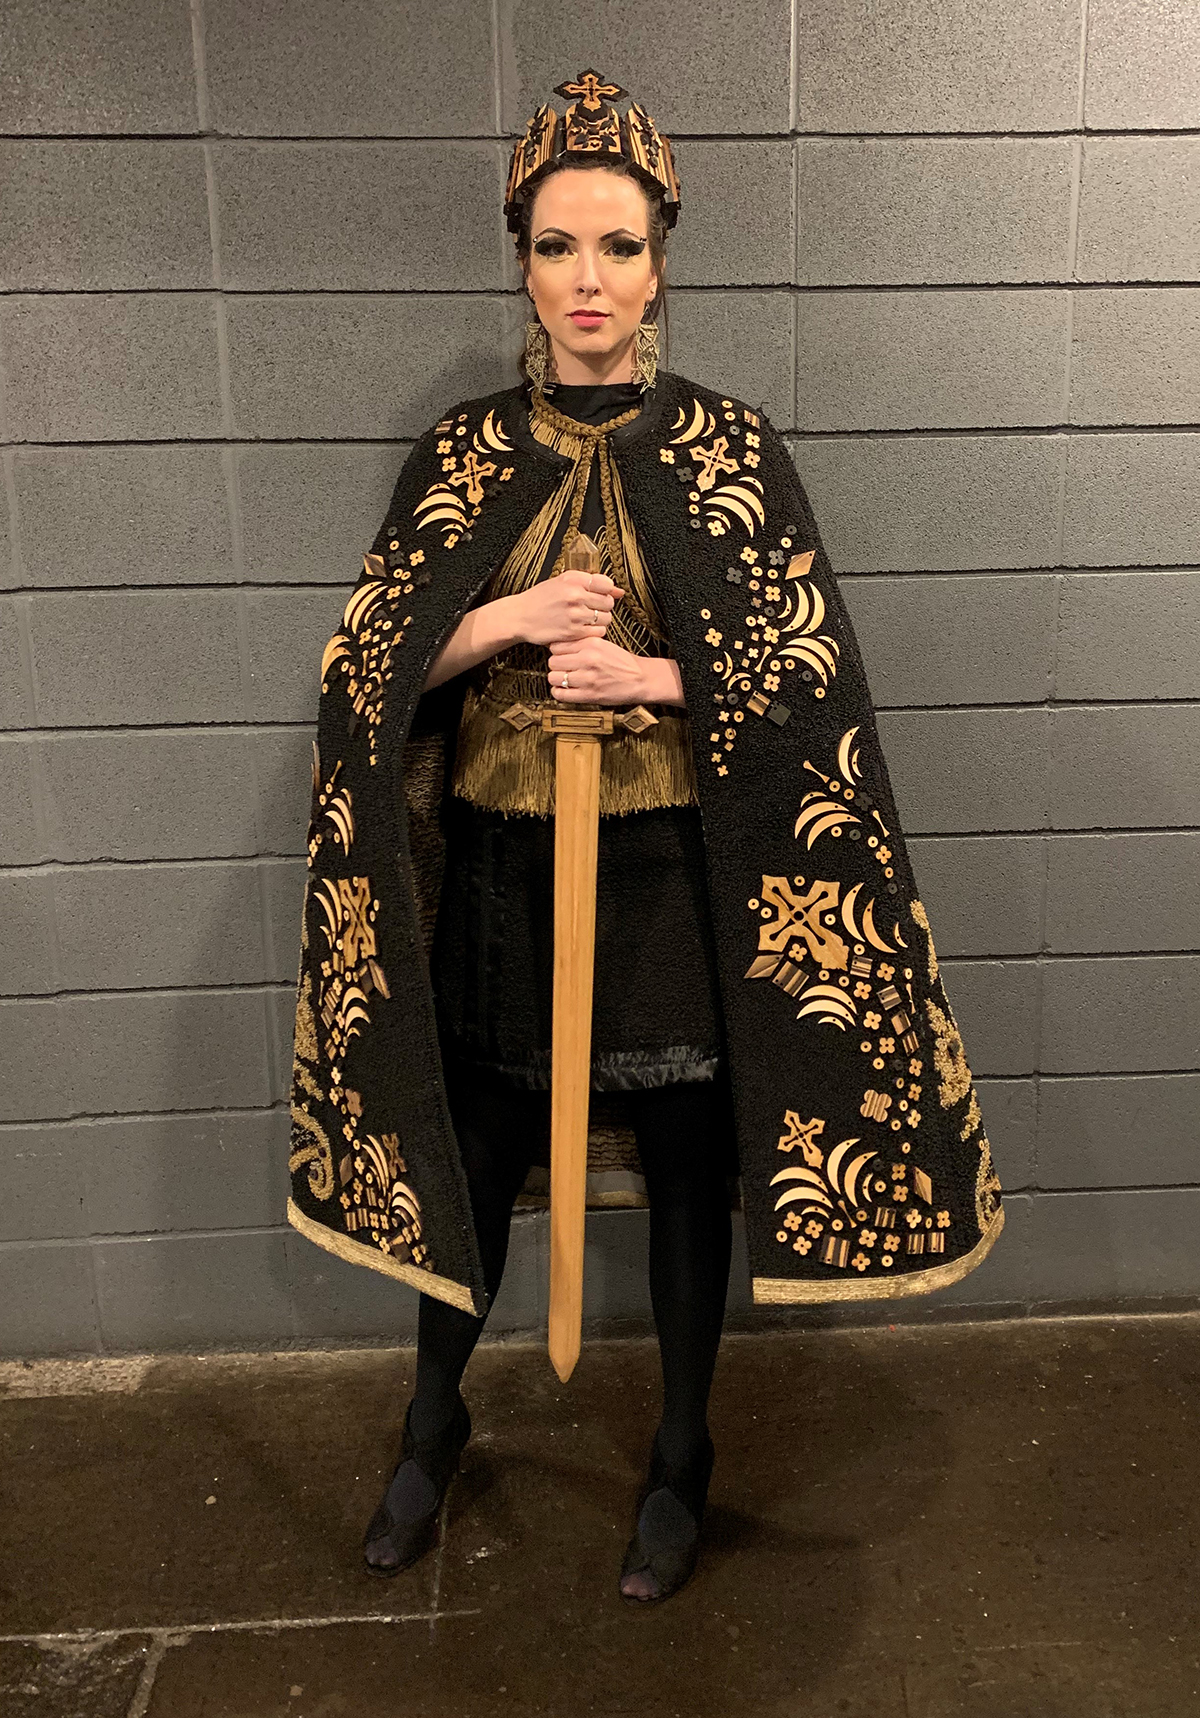 Model wearing black and tan design competition cape, shirt and crown holding wooden sword